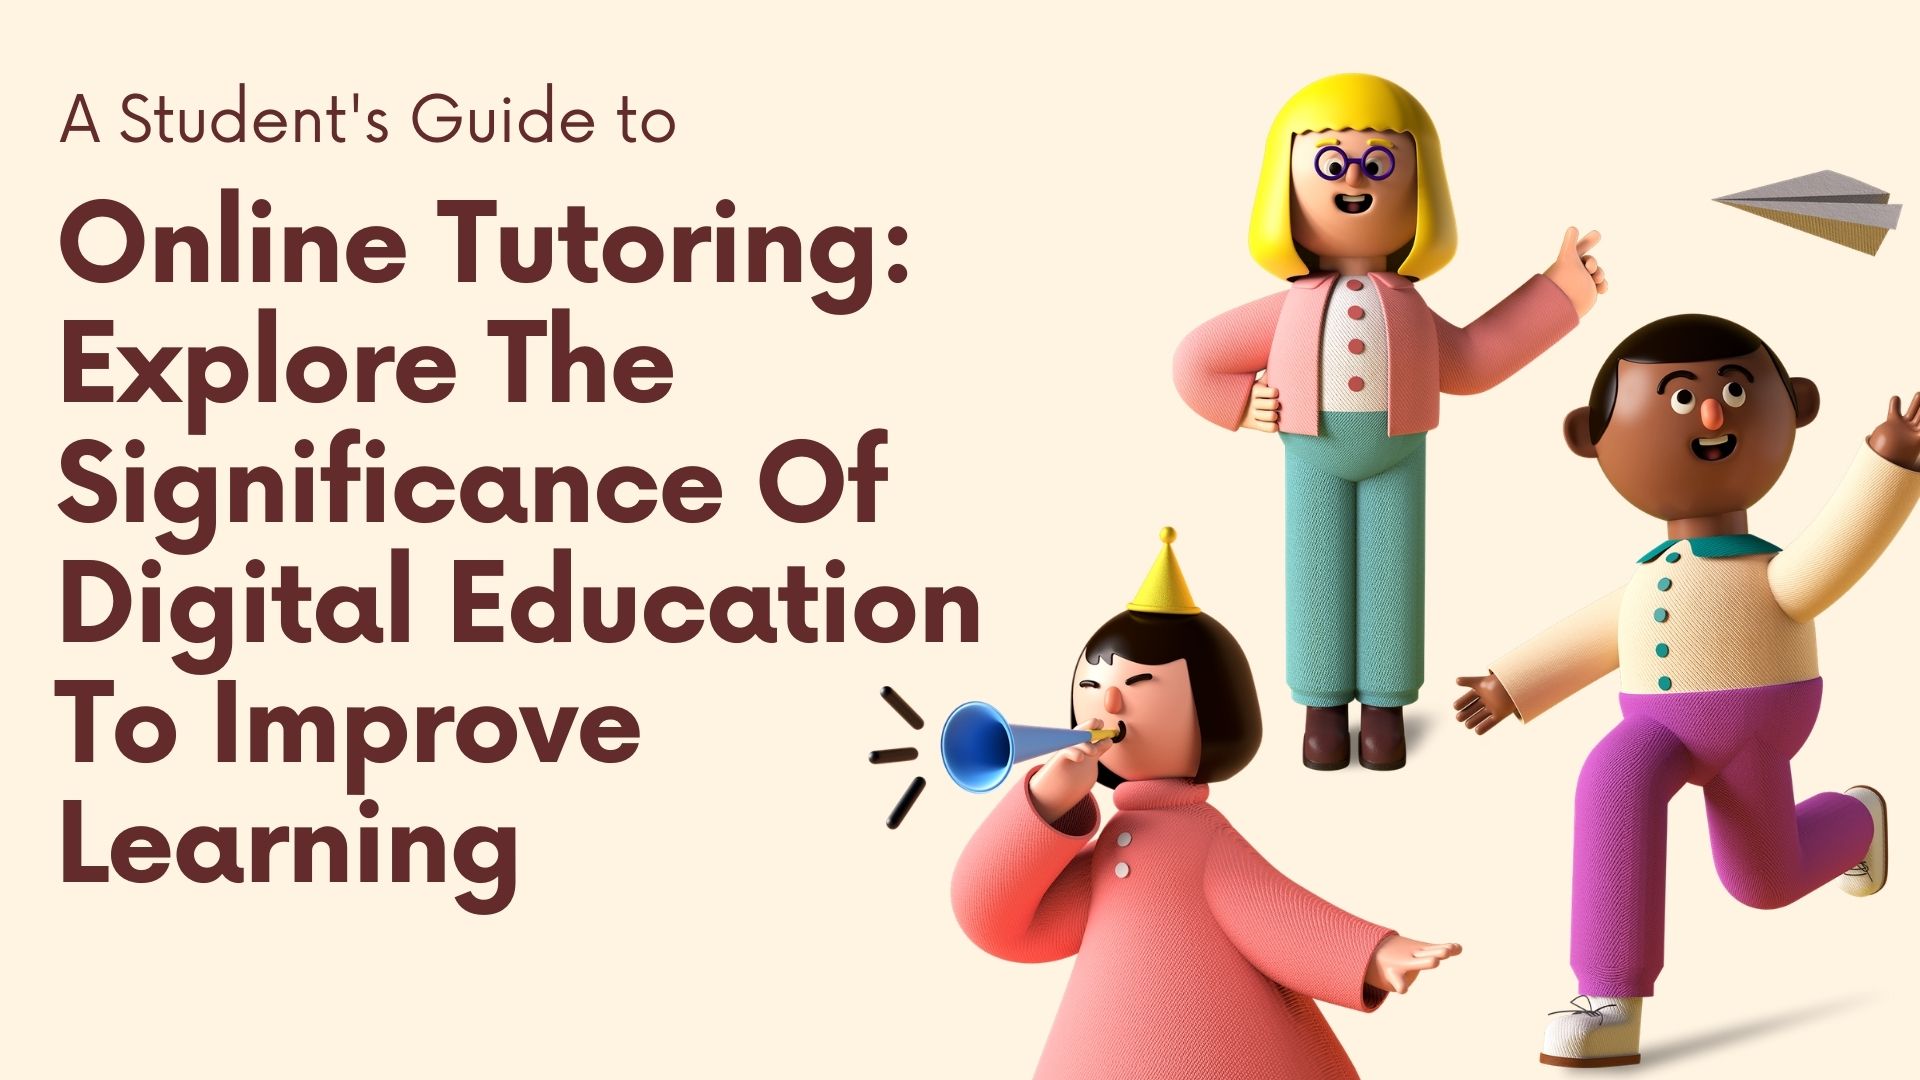 Article about Online Tutoring: Explore The Significance Of Digital Education 